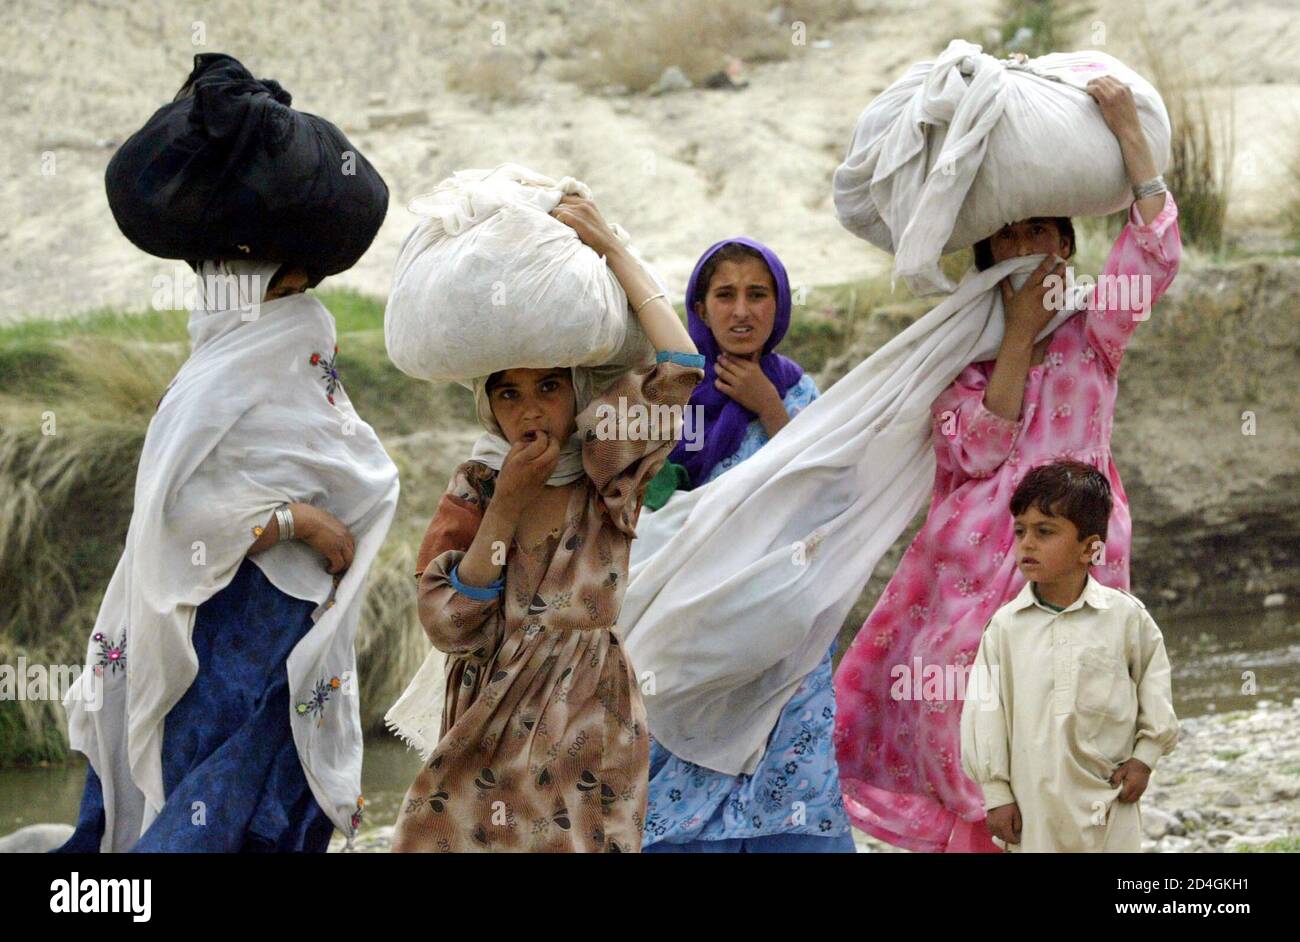 A Tribal Family Flees Their Home As Pakistani Troops Intensify Their Hunt For Islamic Militants In Wana South Waziristan Near The Afghan Border March 04 A Suspected Senior Al Qaeda Member